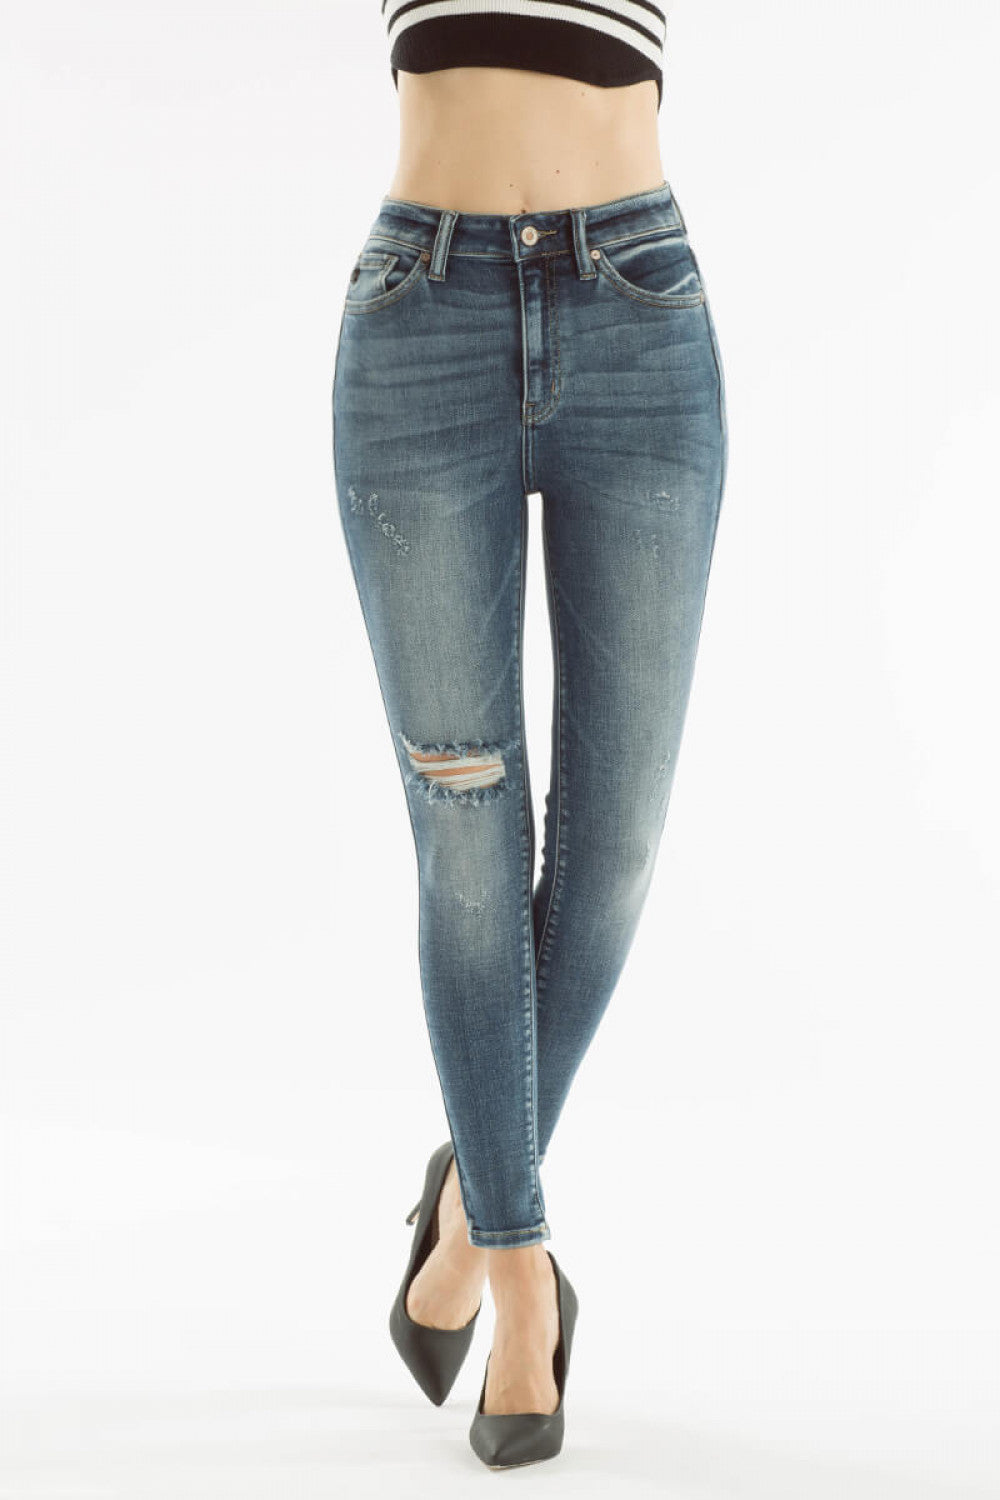 Aubrey High-Rise Ankle Skinny Jeans - Wild Luxe Boutique